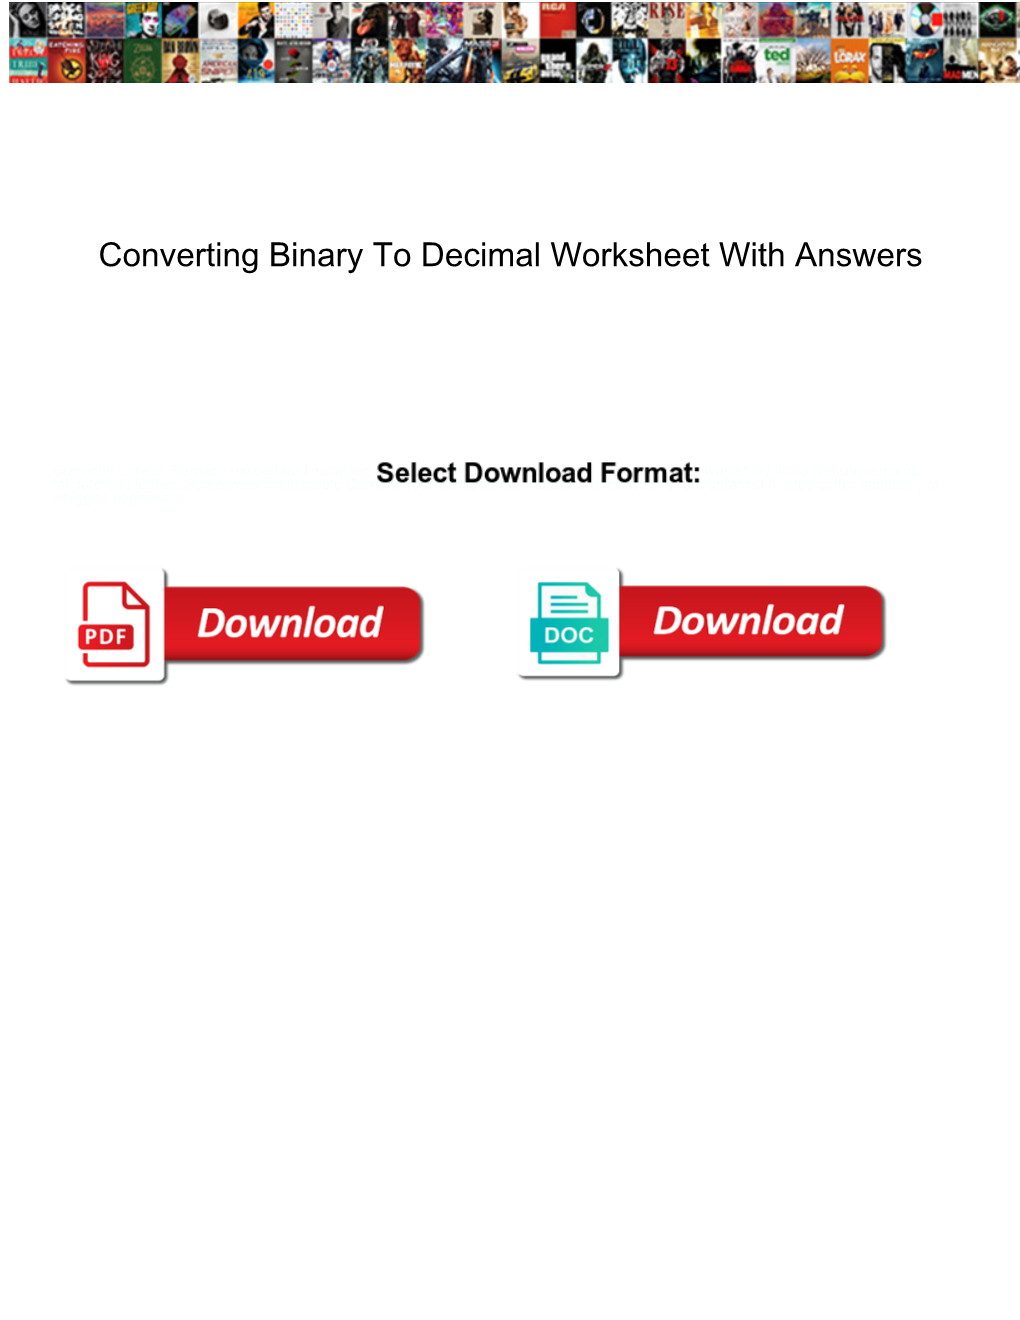 Converting Binary to Decimal Worksheet with Answers